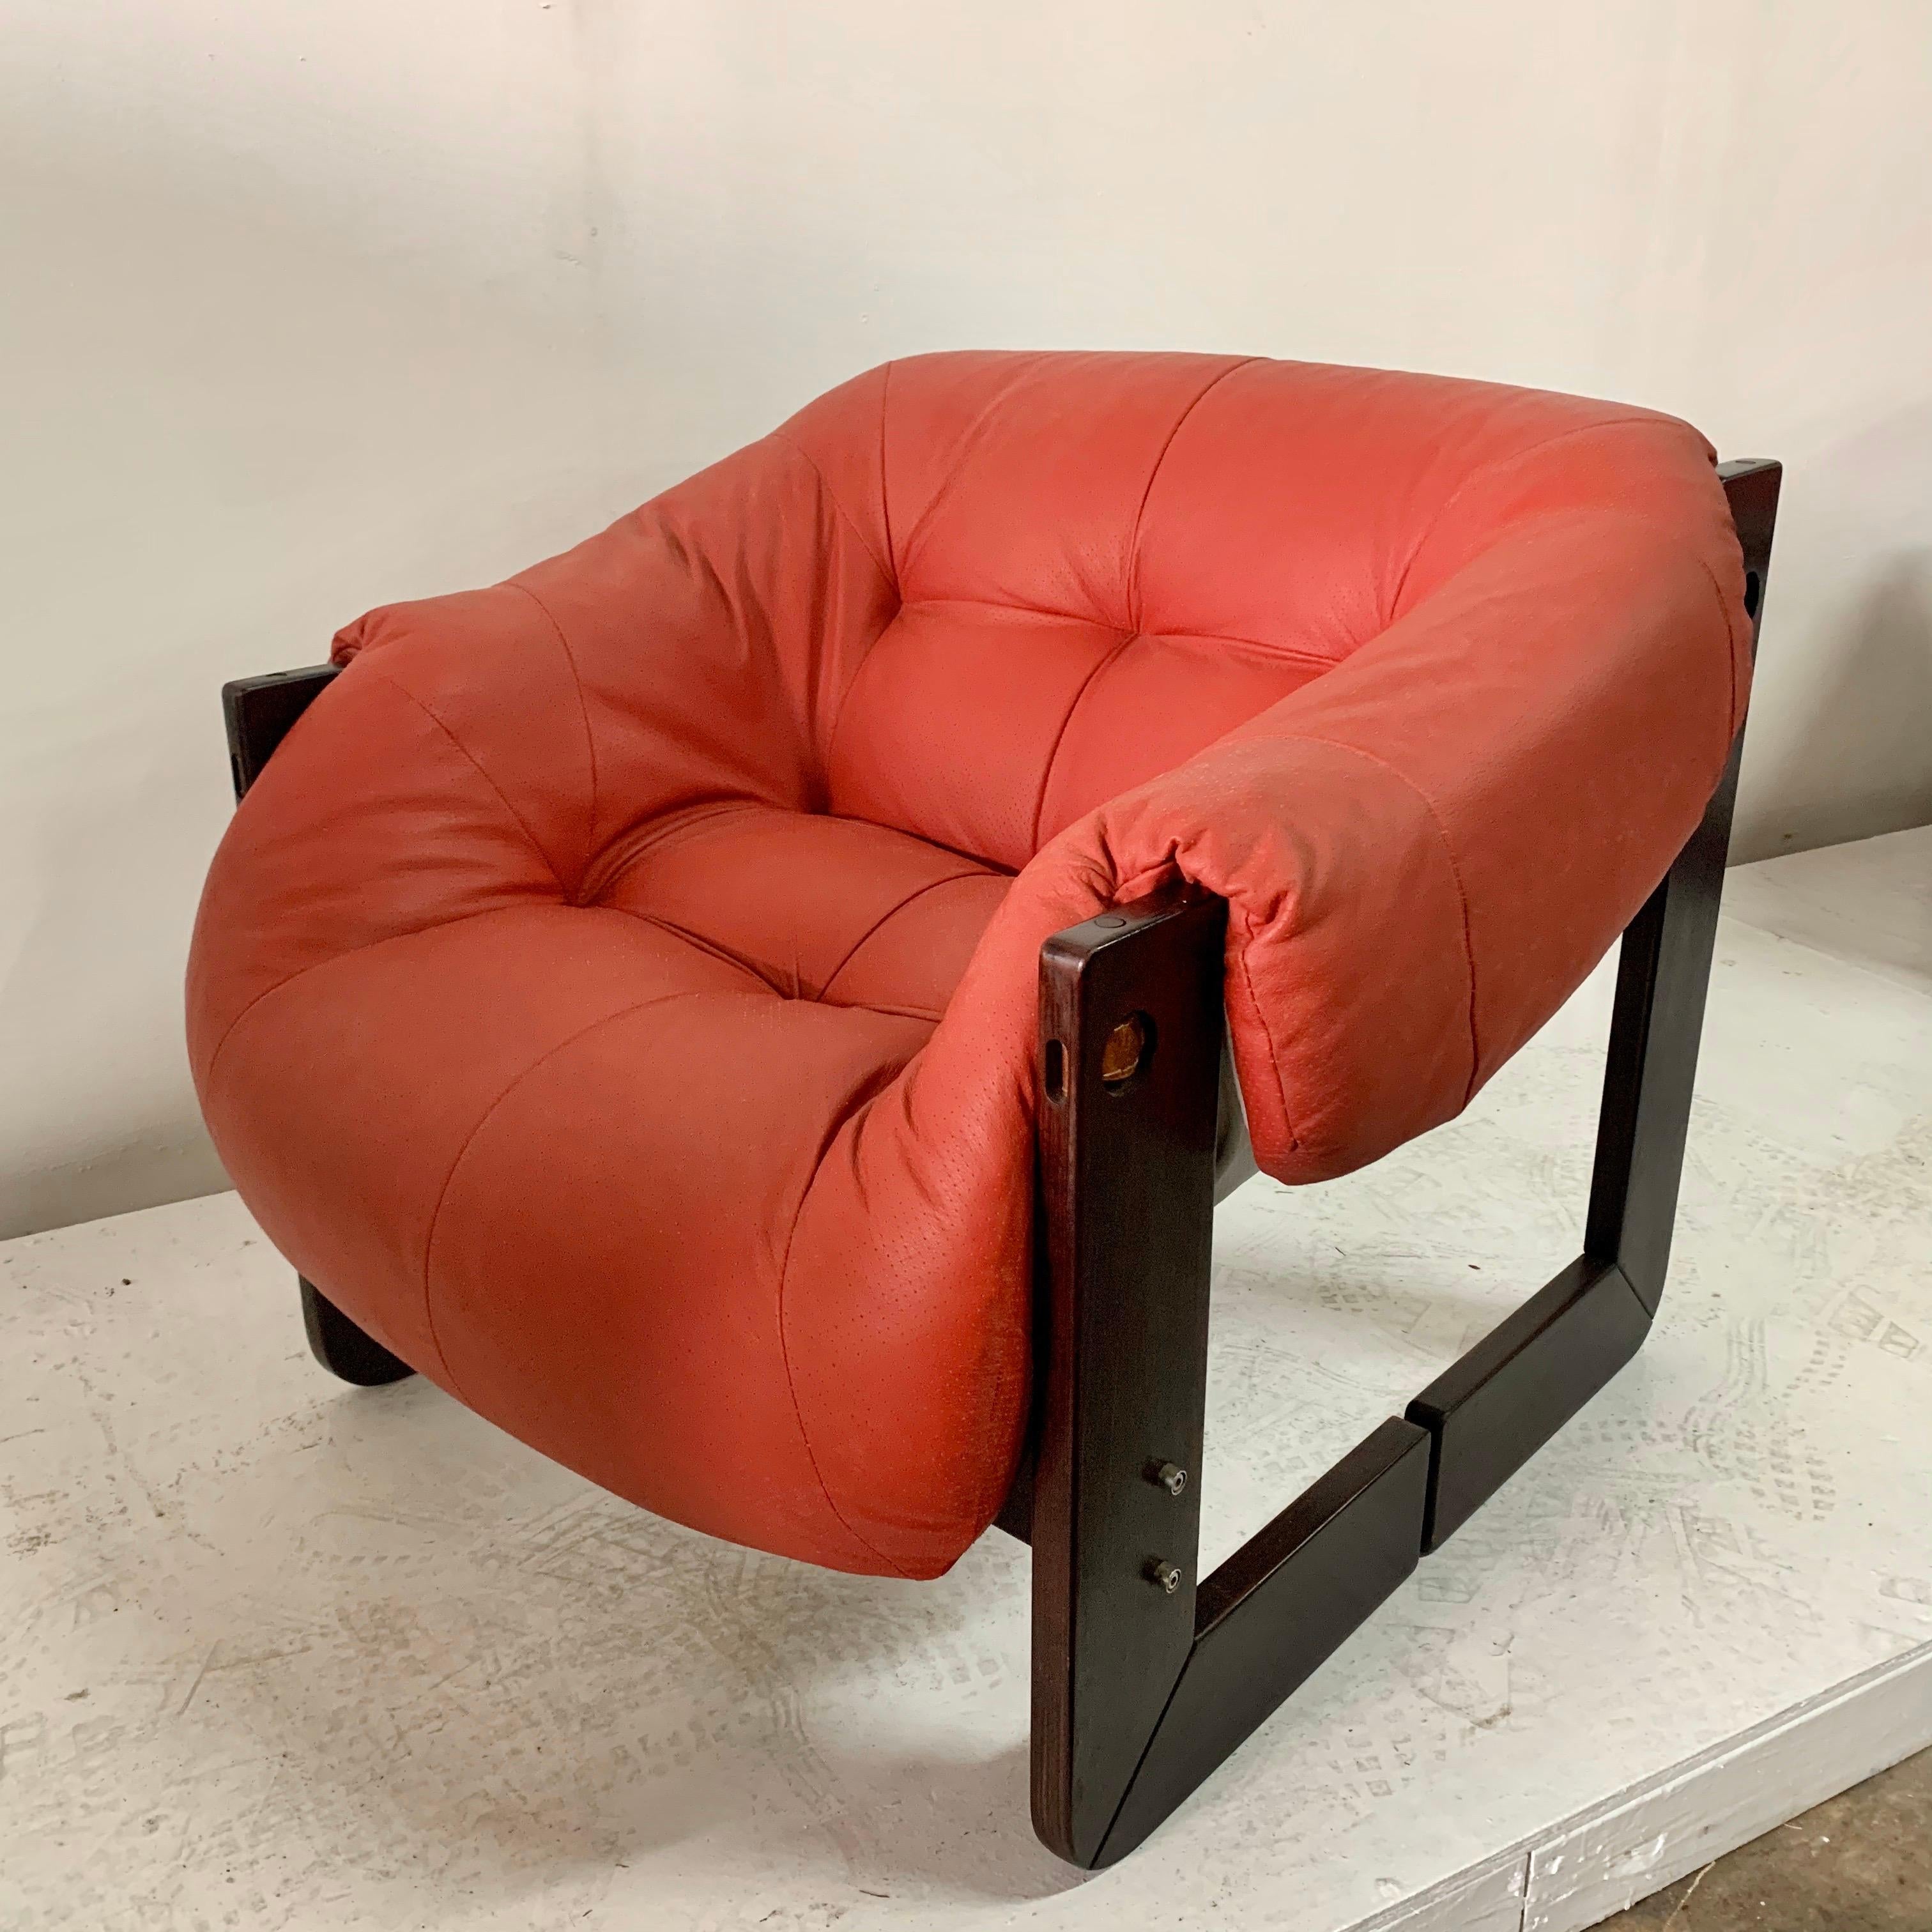 Mid-Century Modern lounge chair by Percival Lafer with Brazilian cherrywood and original vintage leather straps and dowels. Really unique design and construction make this a true statement piece. The split wood side pieces and the stitched leather